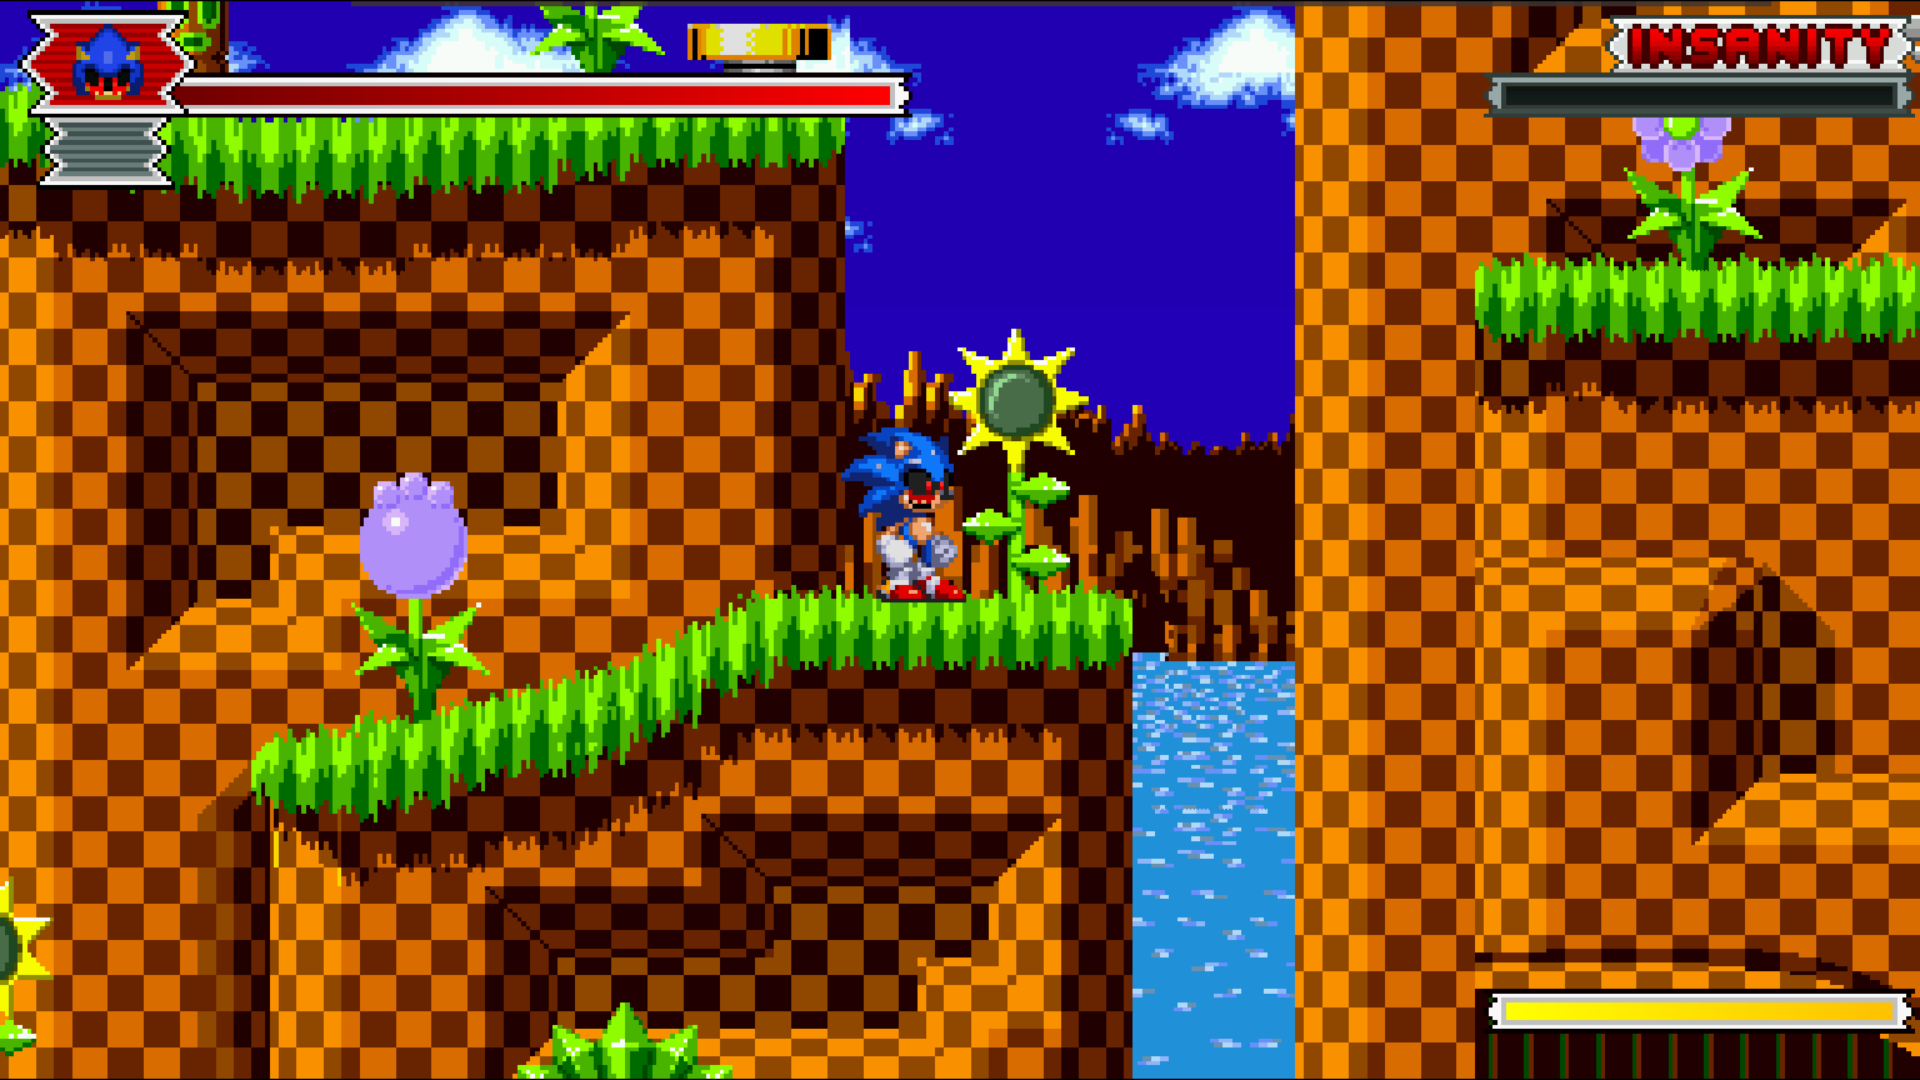 Sonic.exe Green Hill Zone Reversed 